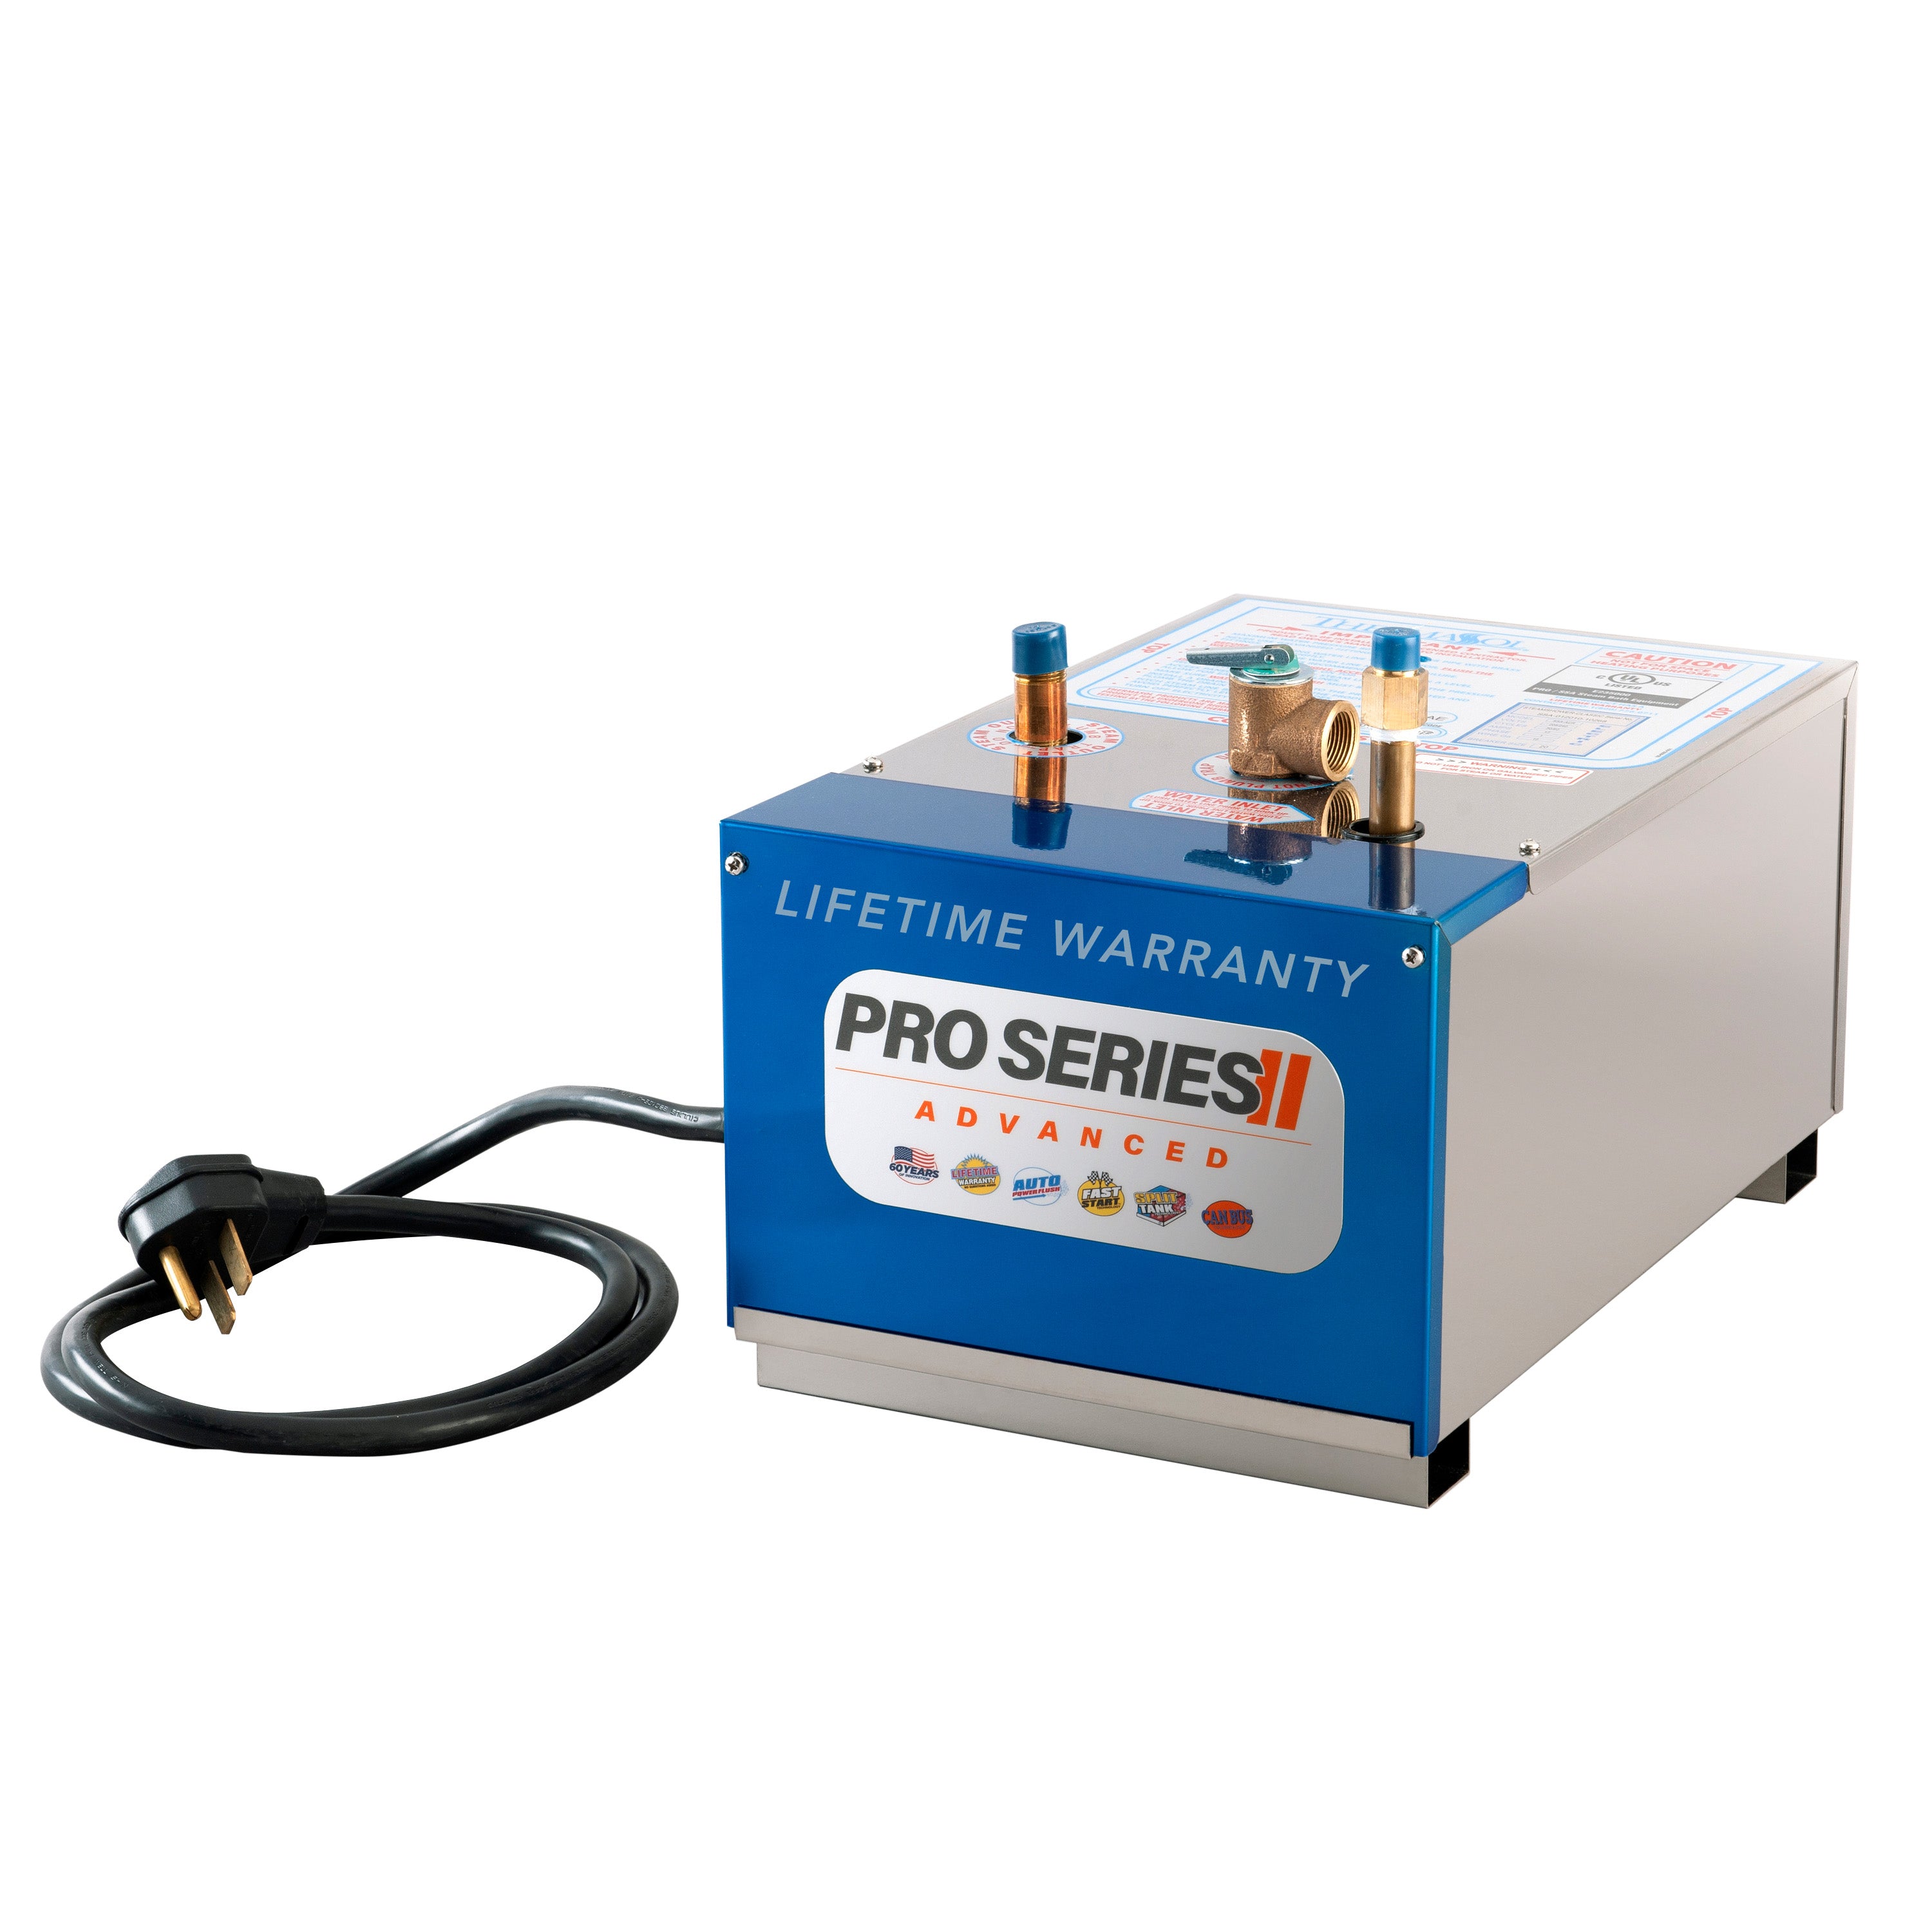 Thermasol Pro Series Advanced with Fast Start, and Powerflush Generator